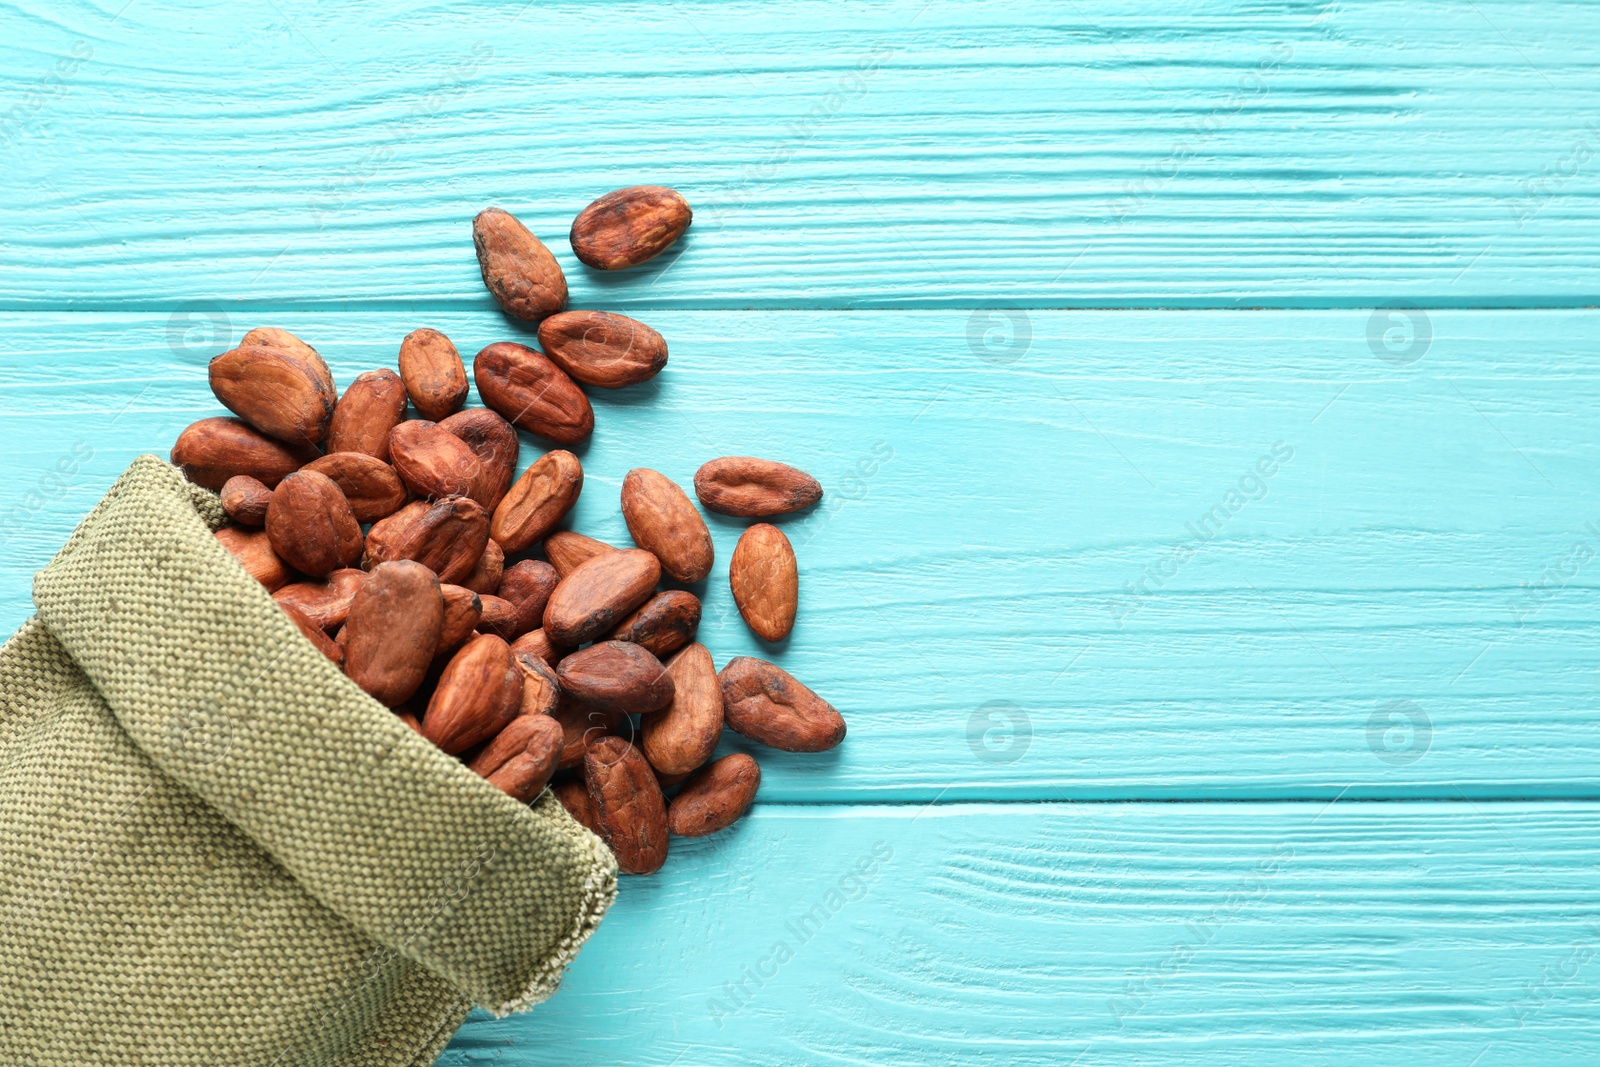 Photo of Cocoa beans in bag on blue wooden table, top view. Space for text